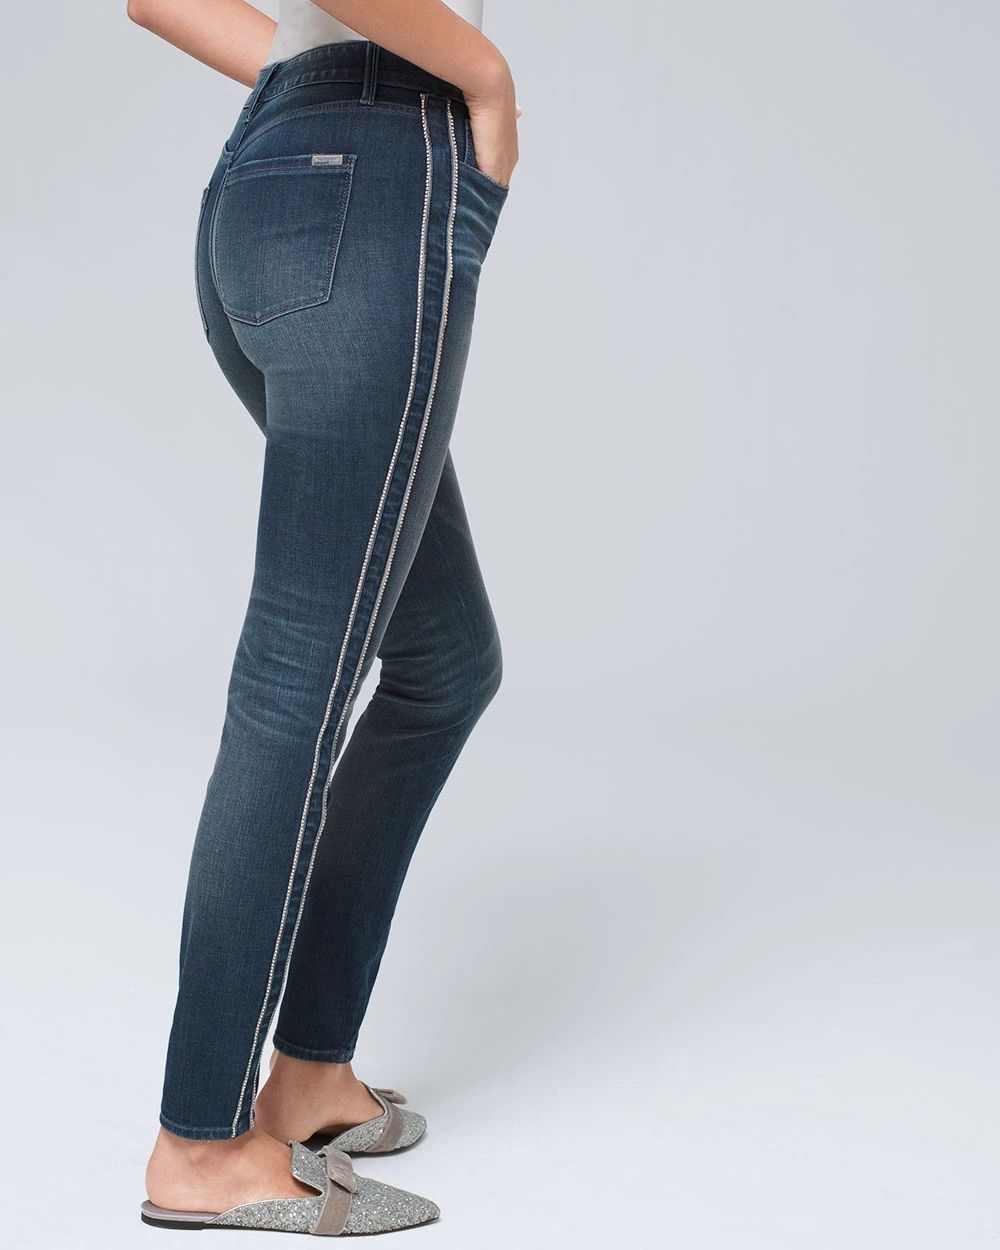 Petite Sculpt High-Rise Skinny Ankle Jeans click to view larger image.